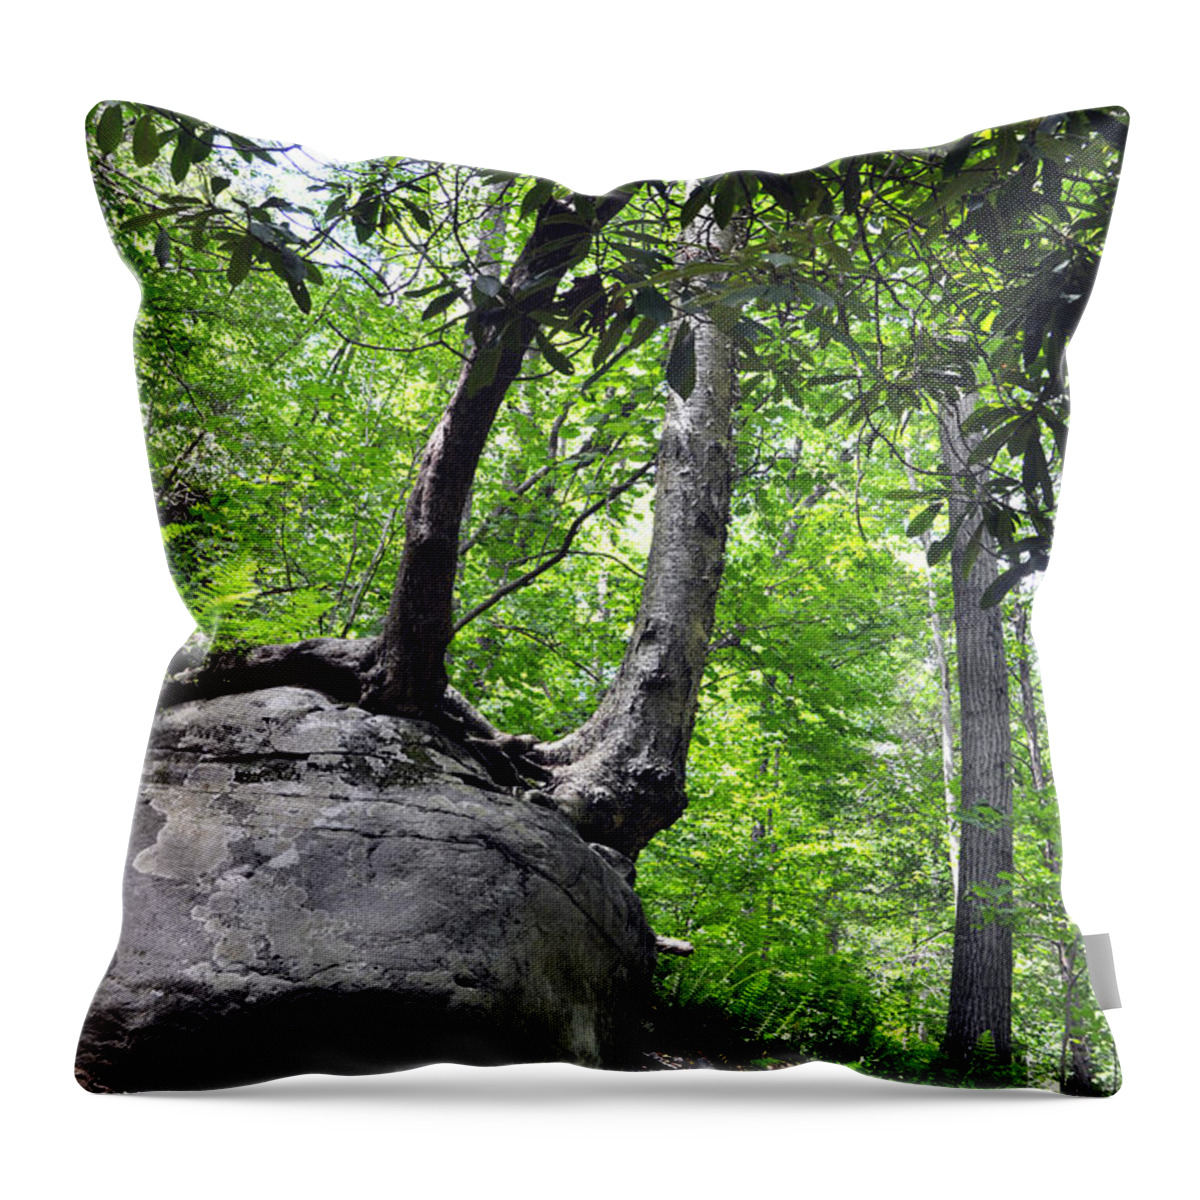 Rhododendron Throw Pillow featuring the photograph Rhododendron by Andrew Dinh